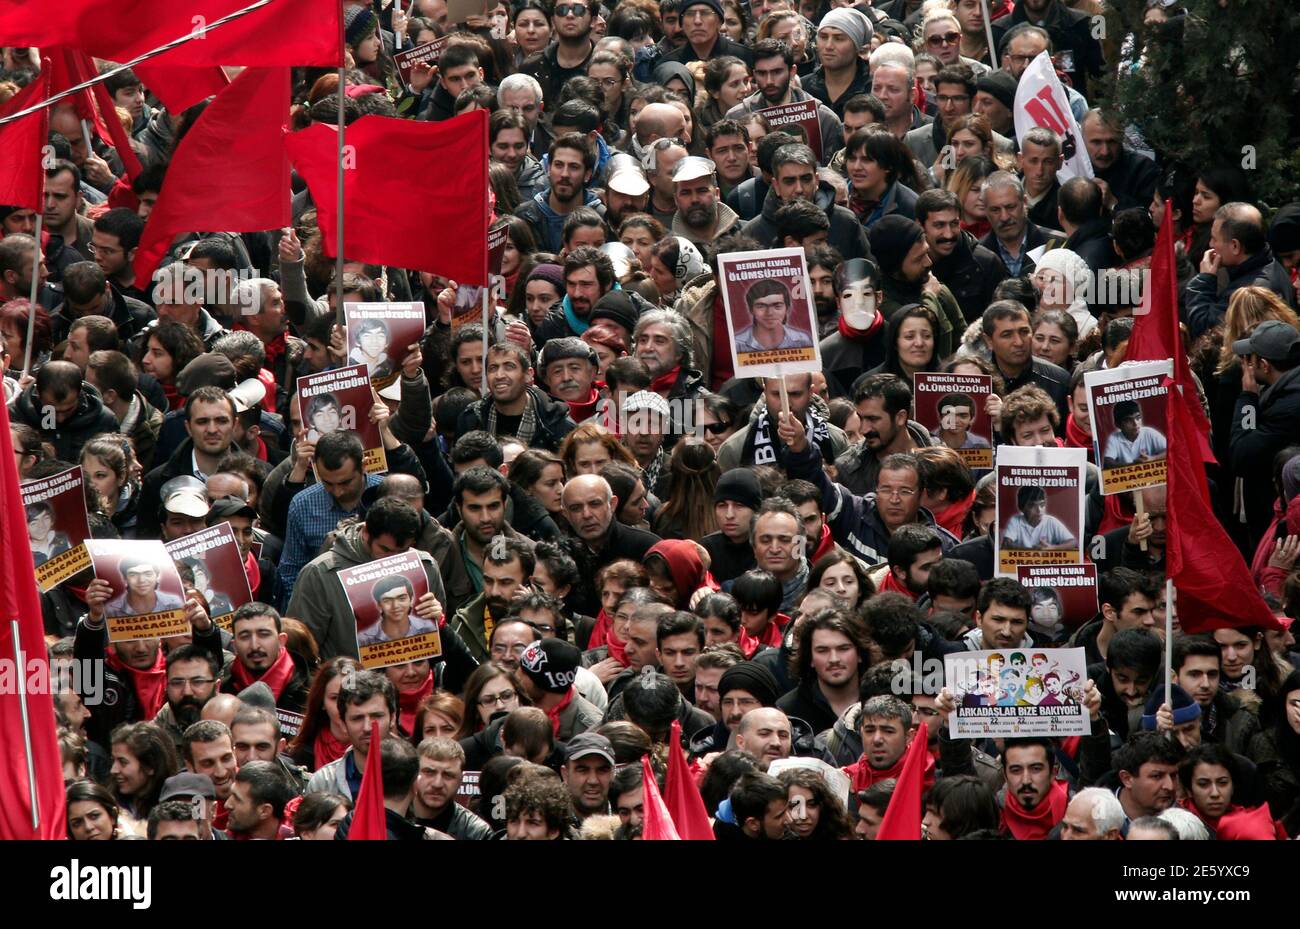 Mourners carry posters of Berkin Elvan as they wait for his funeral ceremony in Okmeydani cemevi, an Alevi place of worship, in Istanbul March 12, 2014.  Several thousand mourners gathered in central Istanbul on Wednesday for the funeral of Elvan, a 15-year-old boy wounded during anti-government demonstrations last summer whose death on Tuesday triggered protests across Turkey.  REUTERS/Osman Orsal (TURKEY  - Tags: POLITICS CIVIL UNREST) Stock Photo